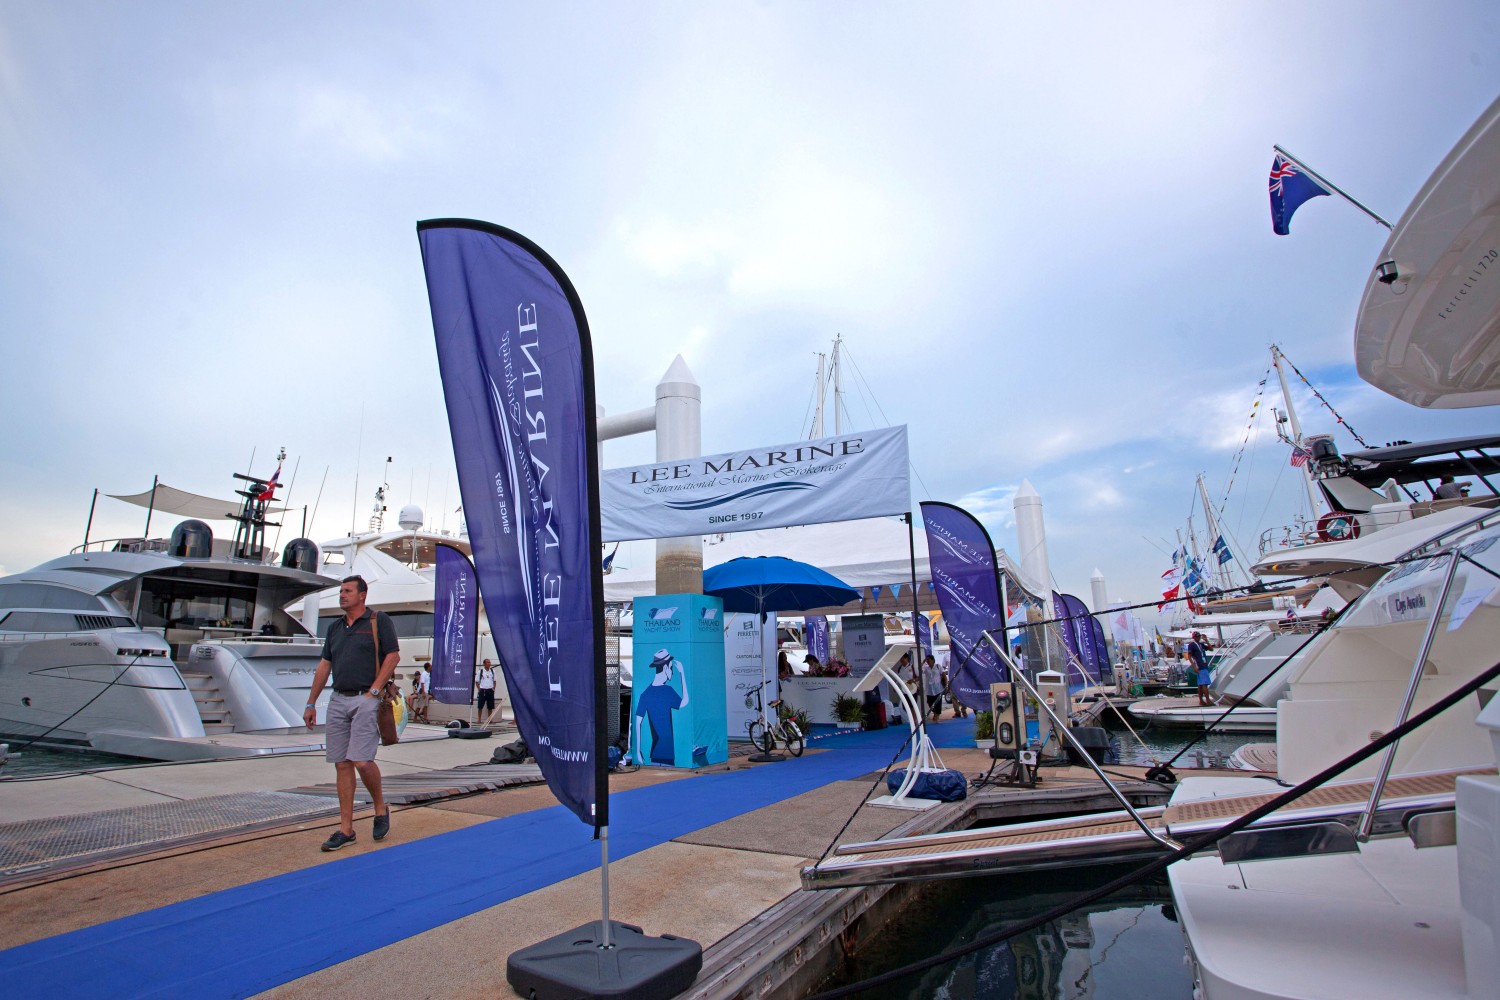 Lee Marine again with the largexst on-water yacht display at Second Edition, Thailand Yacht Show (1)